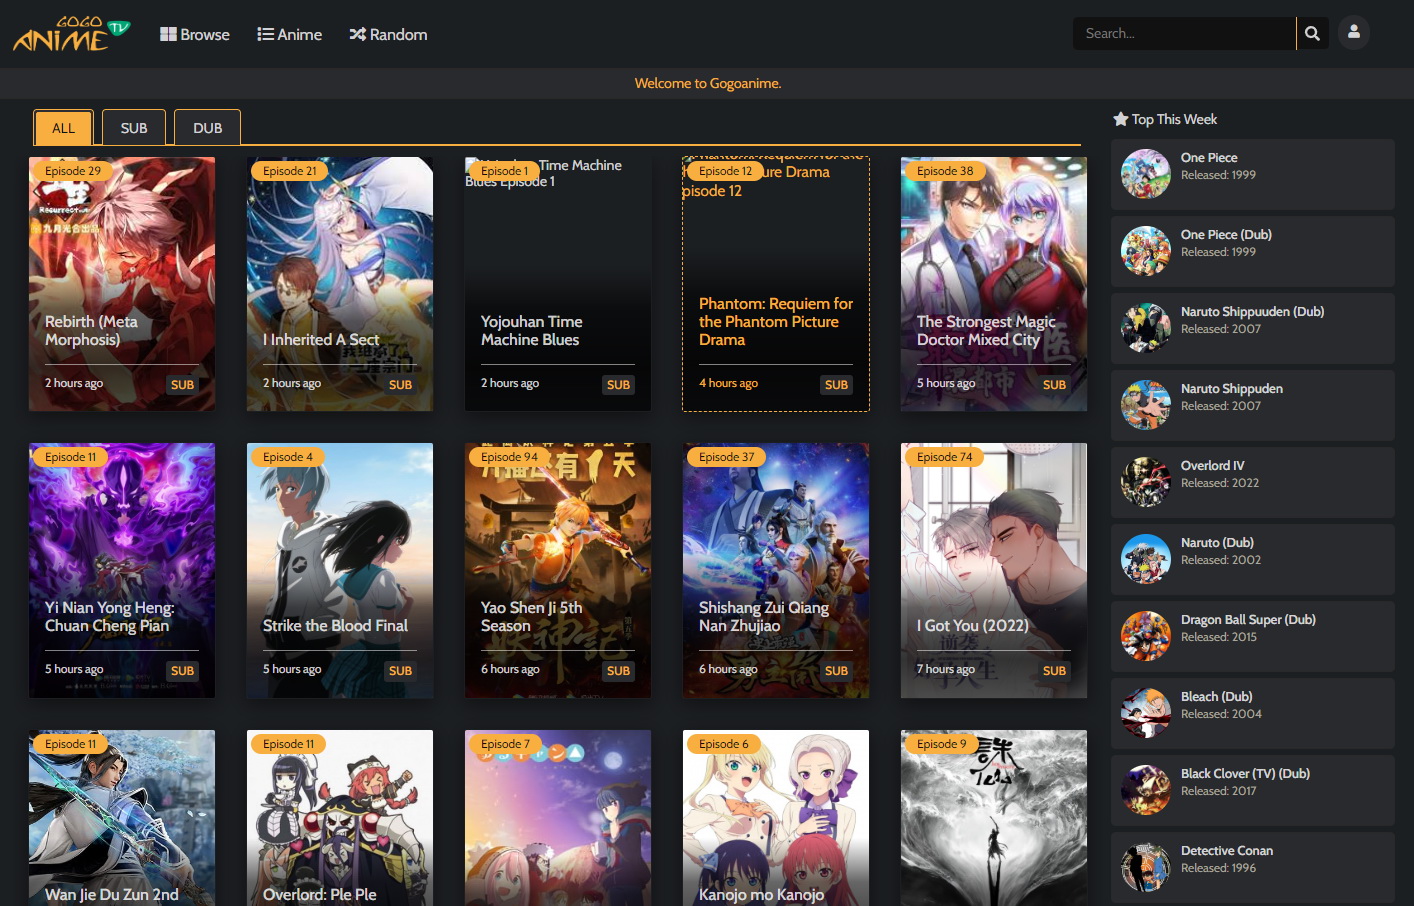 AnimeKisa: HD Anime Online APK for Android Download